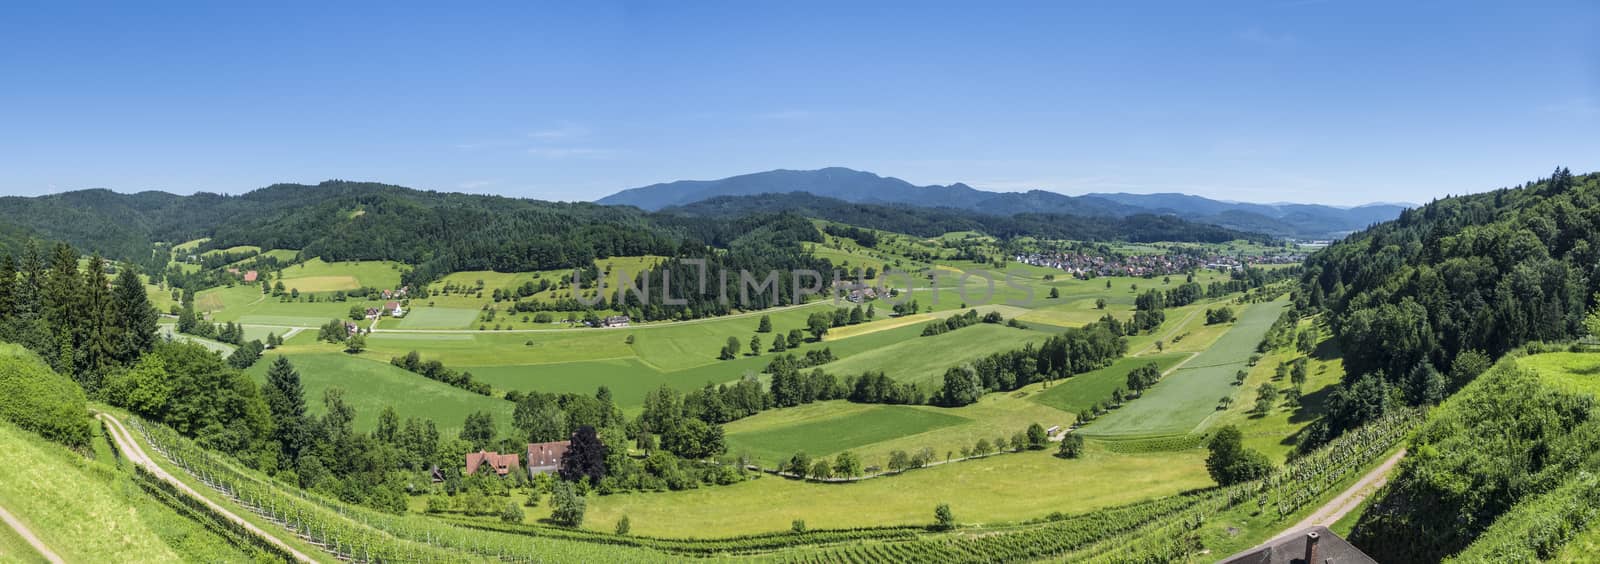 An image of a panoramic view from the Hochburg Emmendingen